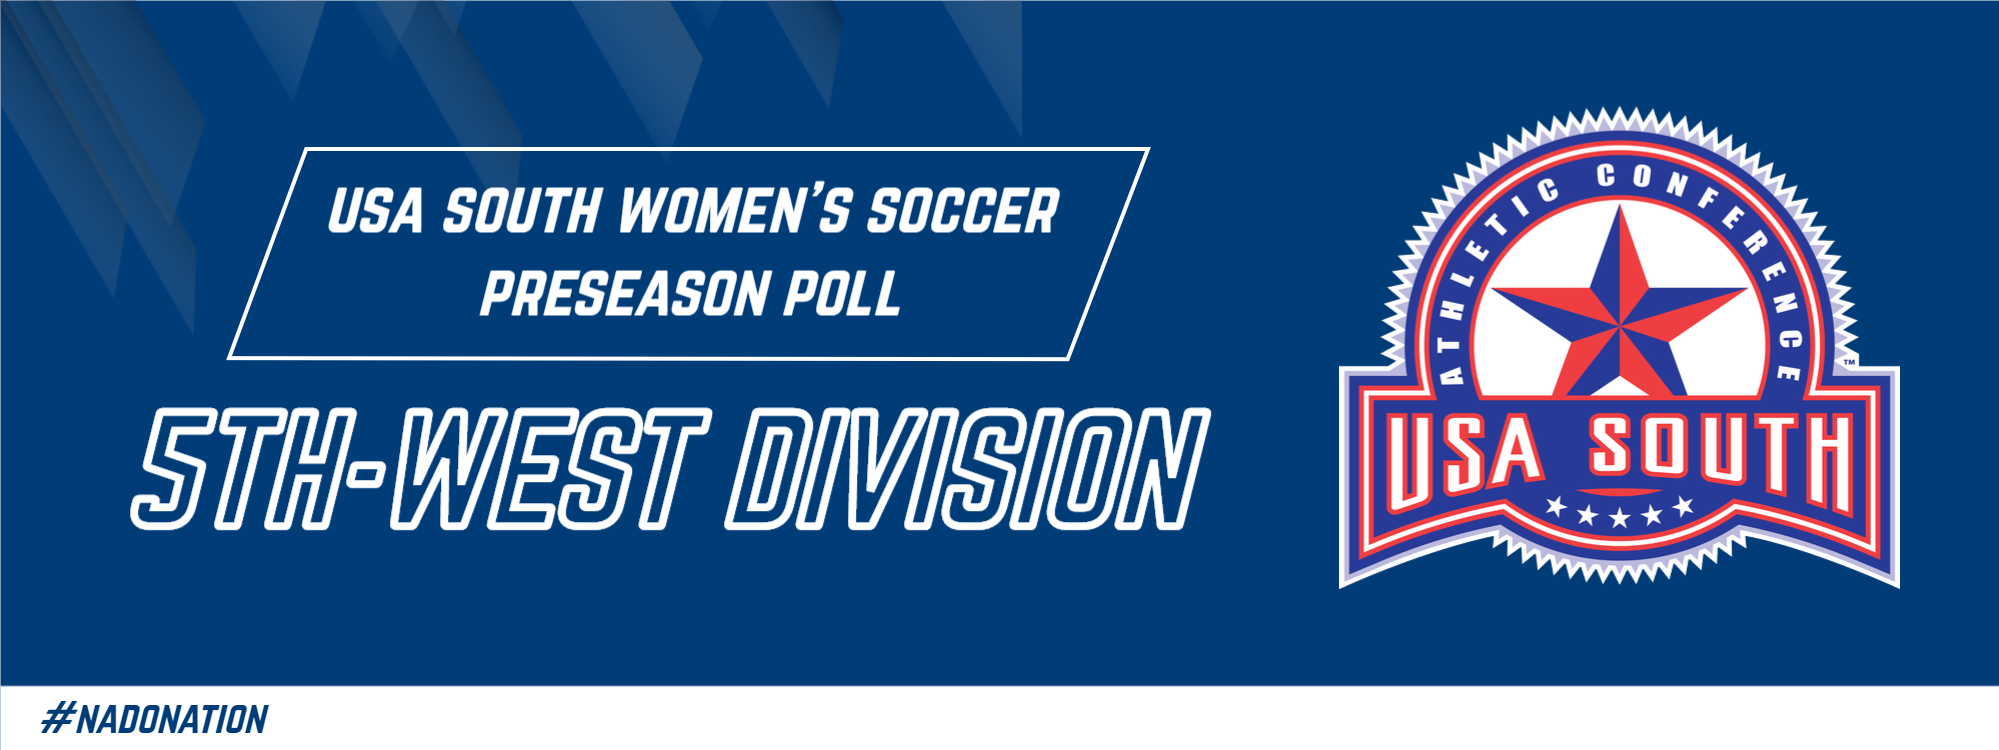 Season Preview: BC Women’s Soccer Tabbed Fifth in USA South West Division Preseason Poll